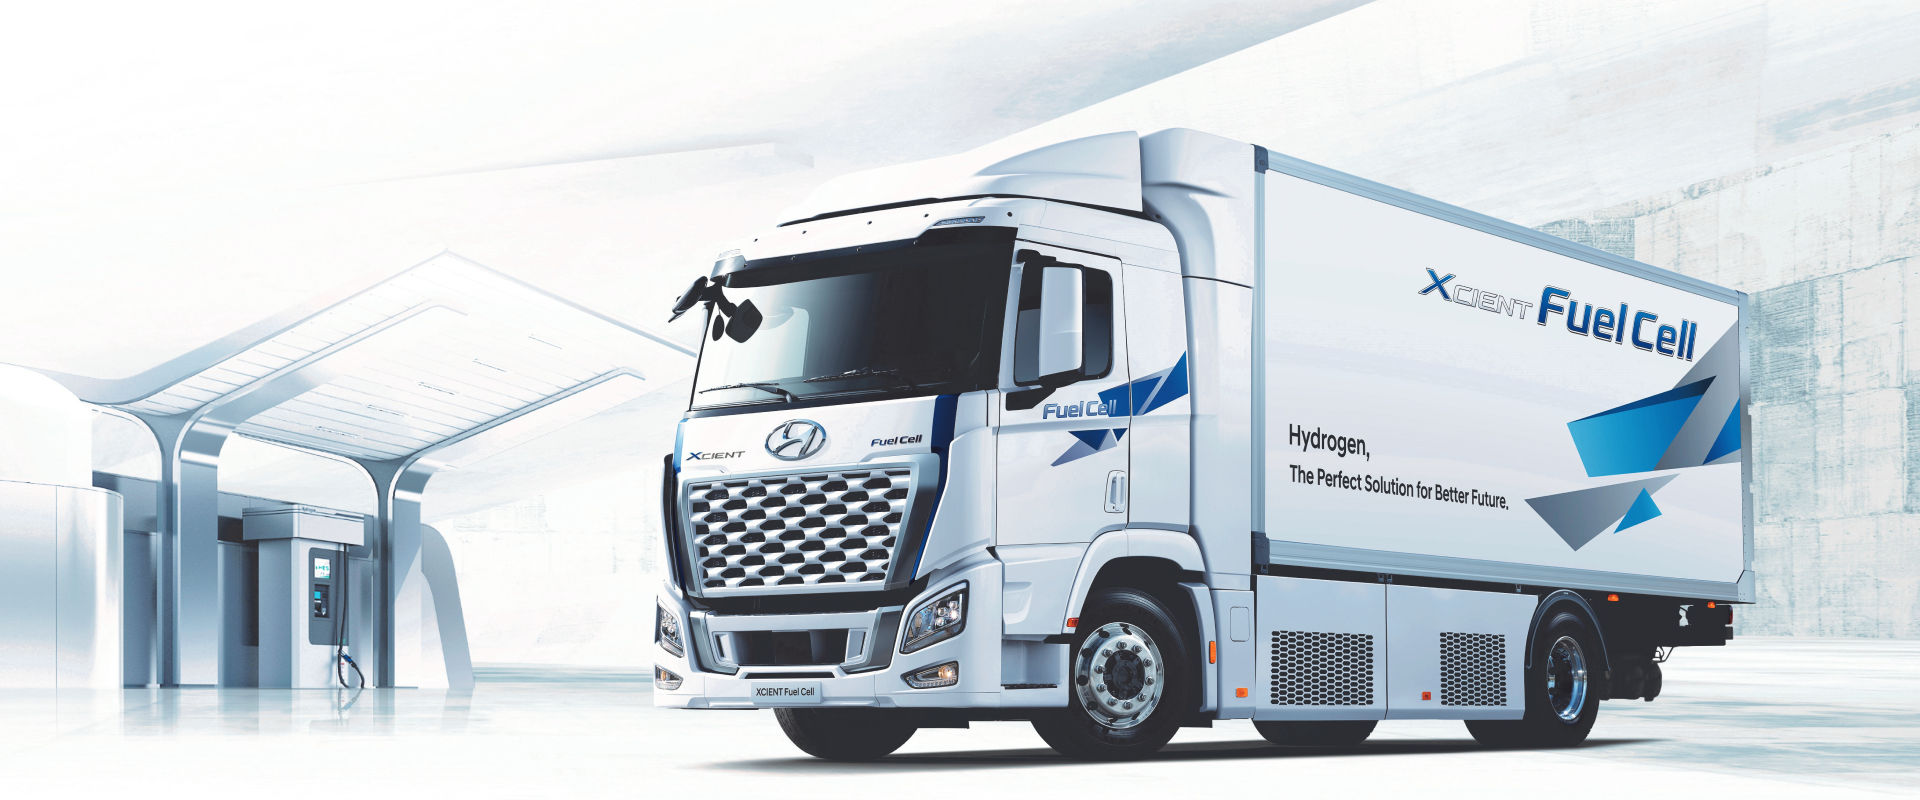 Hyundai Motor Brings Hydrogen-powered Commercial Trucking to Israel with XCIENT Fuel Cell 